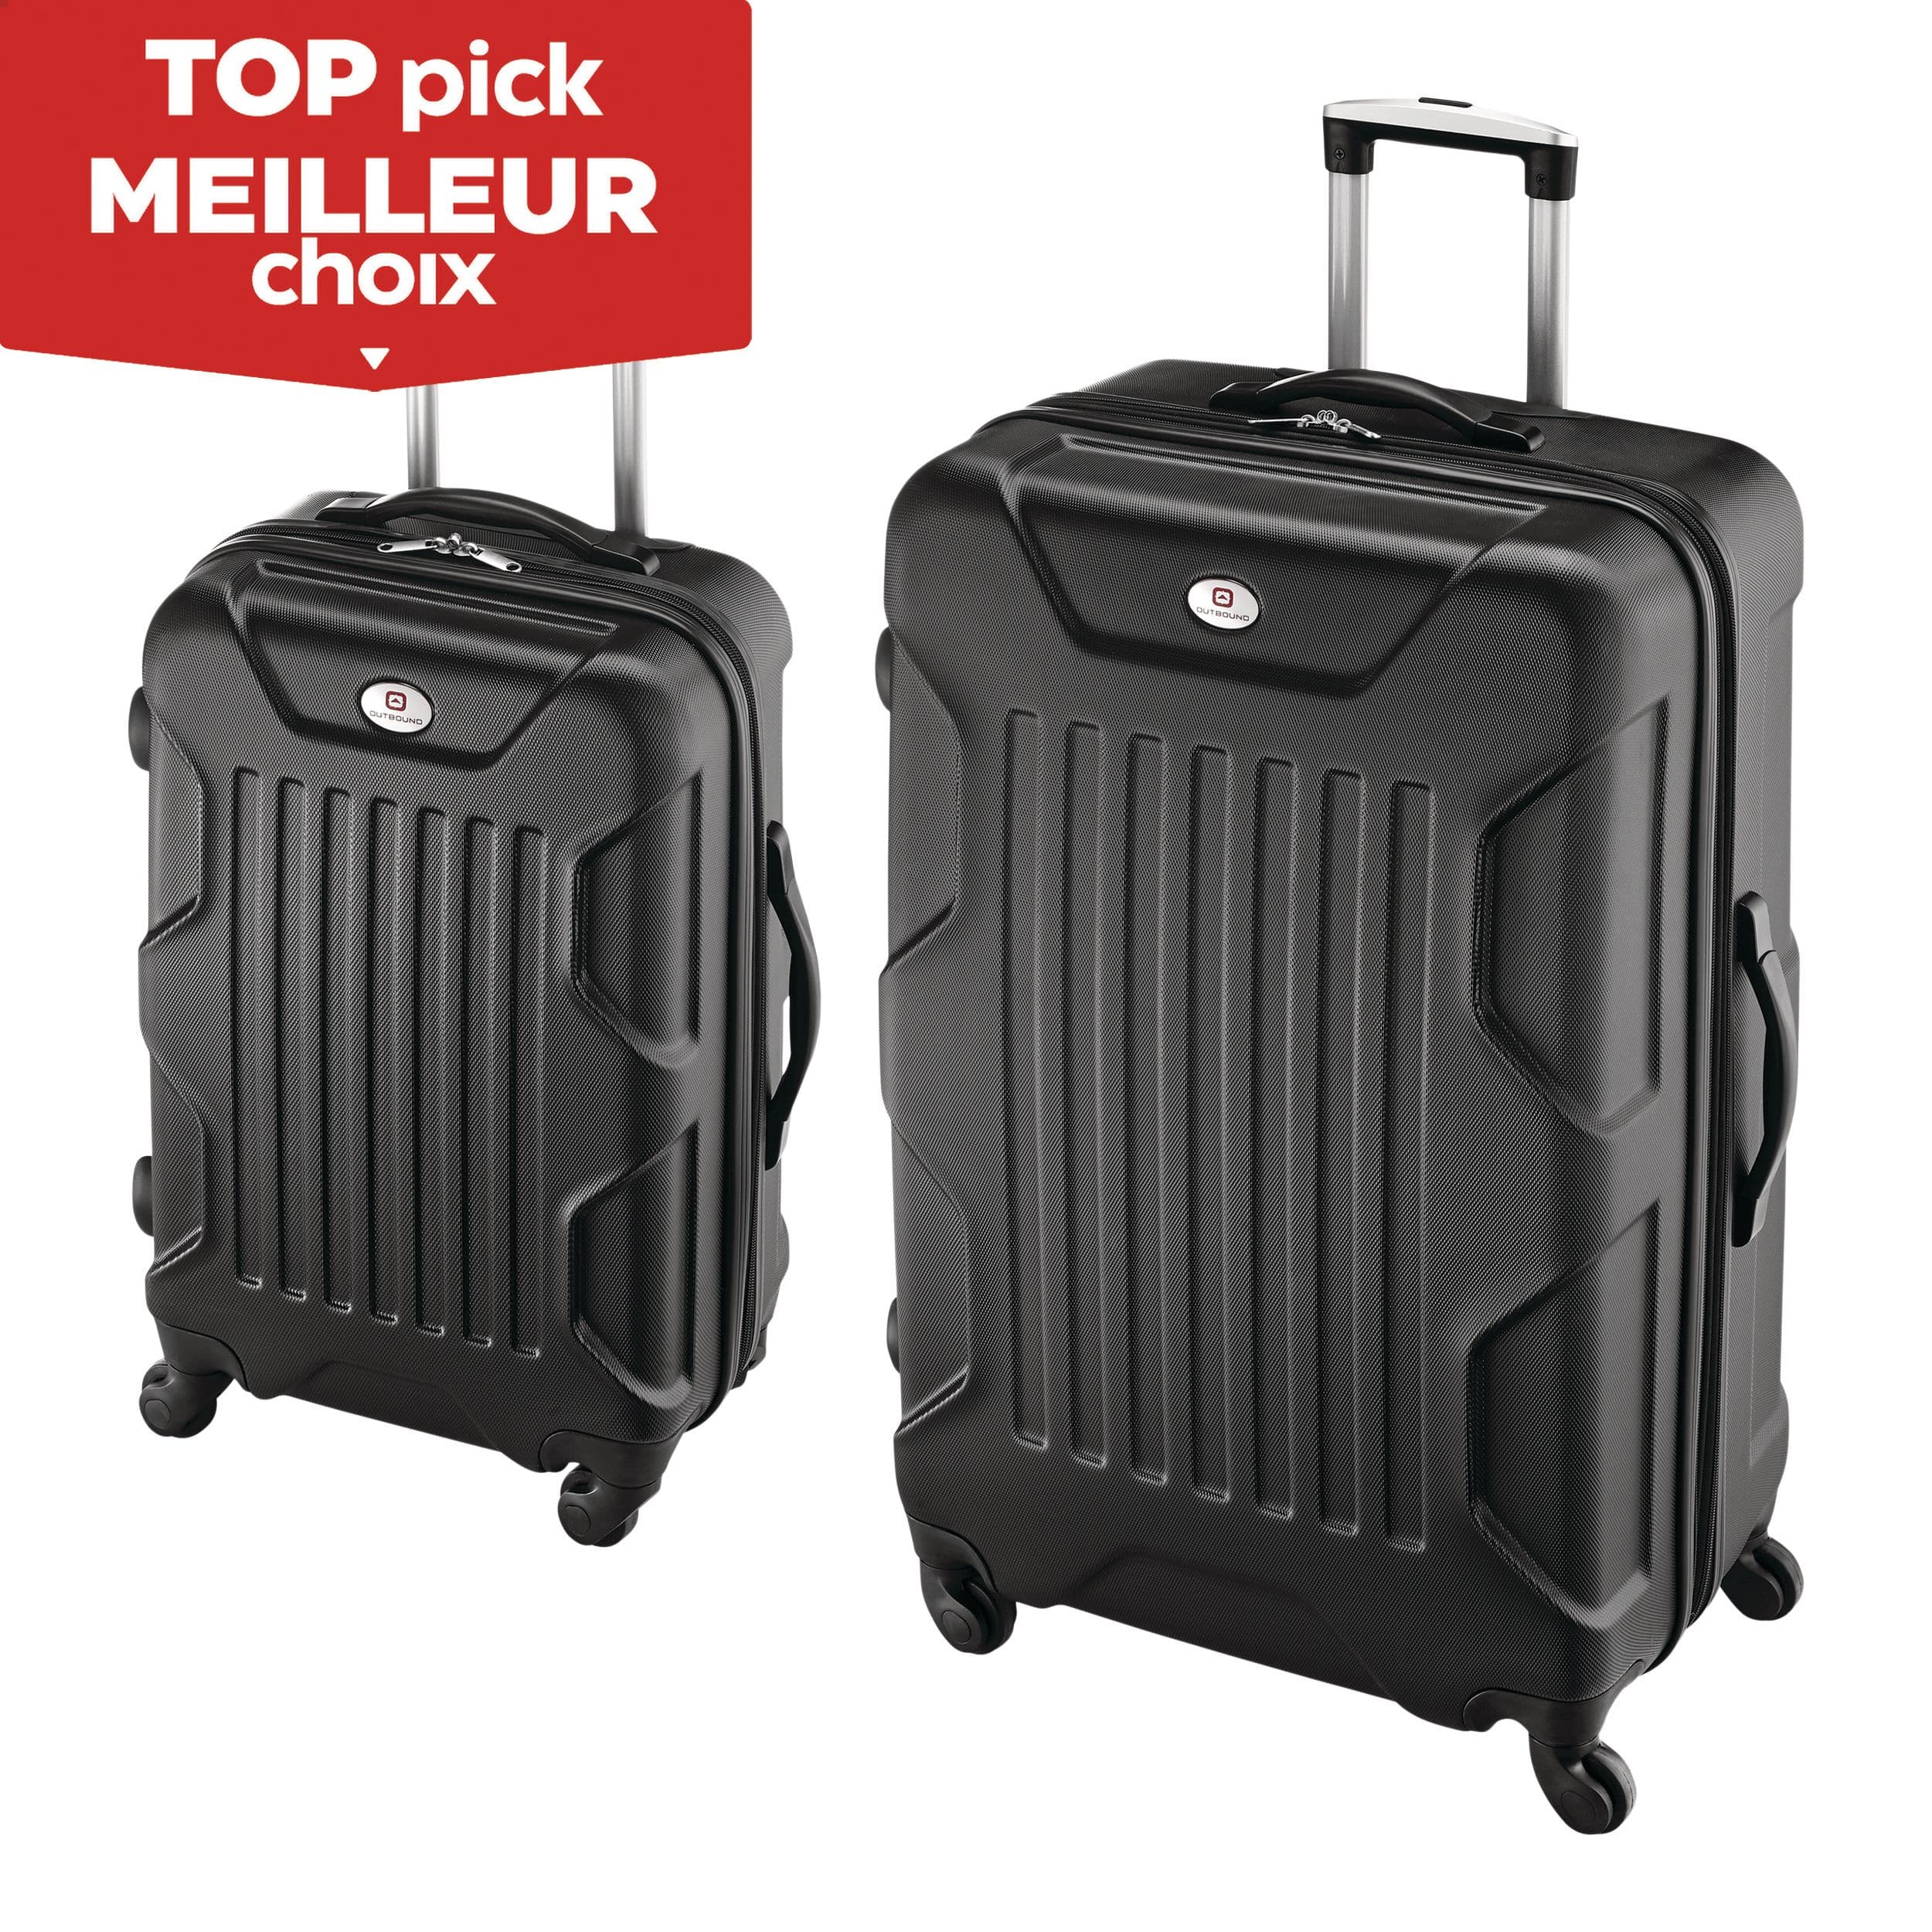 https://media-www.canadiantire.ca/product/playing/camping/backpacks-luggage-accessories/0762887/outbound-hardside-spin-suitcase-2-piece-bce3a399-c7d8-4587-afb0-13af69922815-jpgrendition.jpg